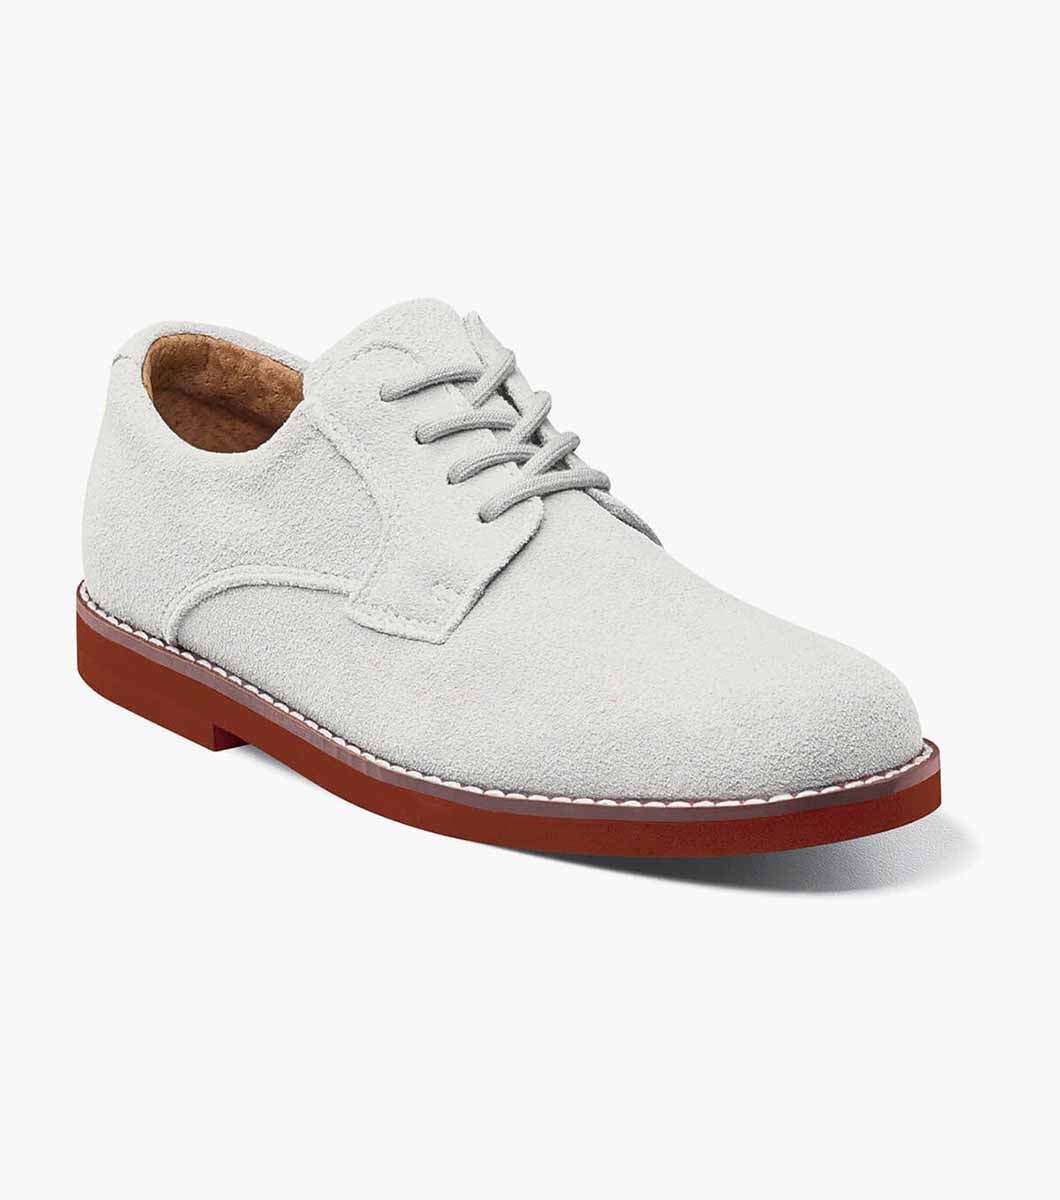 Made for school or play, the Florsheim Kearny Plain Toe Oxford, Jr. is tough enough for any after school activity. This dress casual suede oxford also features a hip contrast outsole and classic laces.  Soft suede upper Breathable, moisture-wicking Suedetec linings Fully cushioned footbed for all-day comfort Lightweight and durable EVA sole